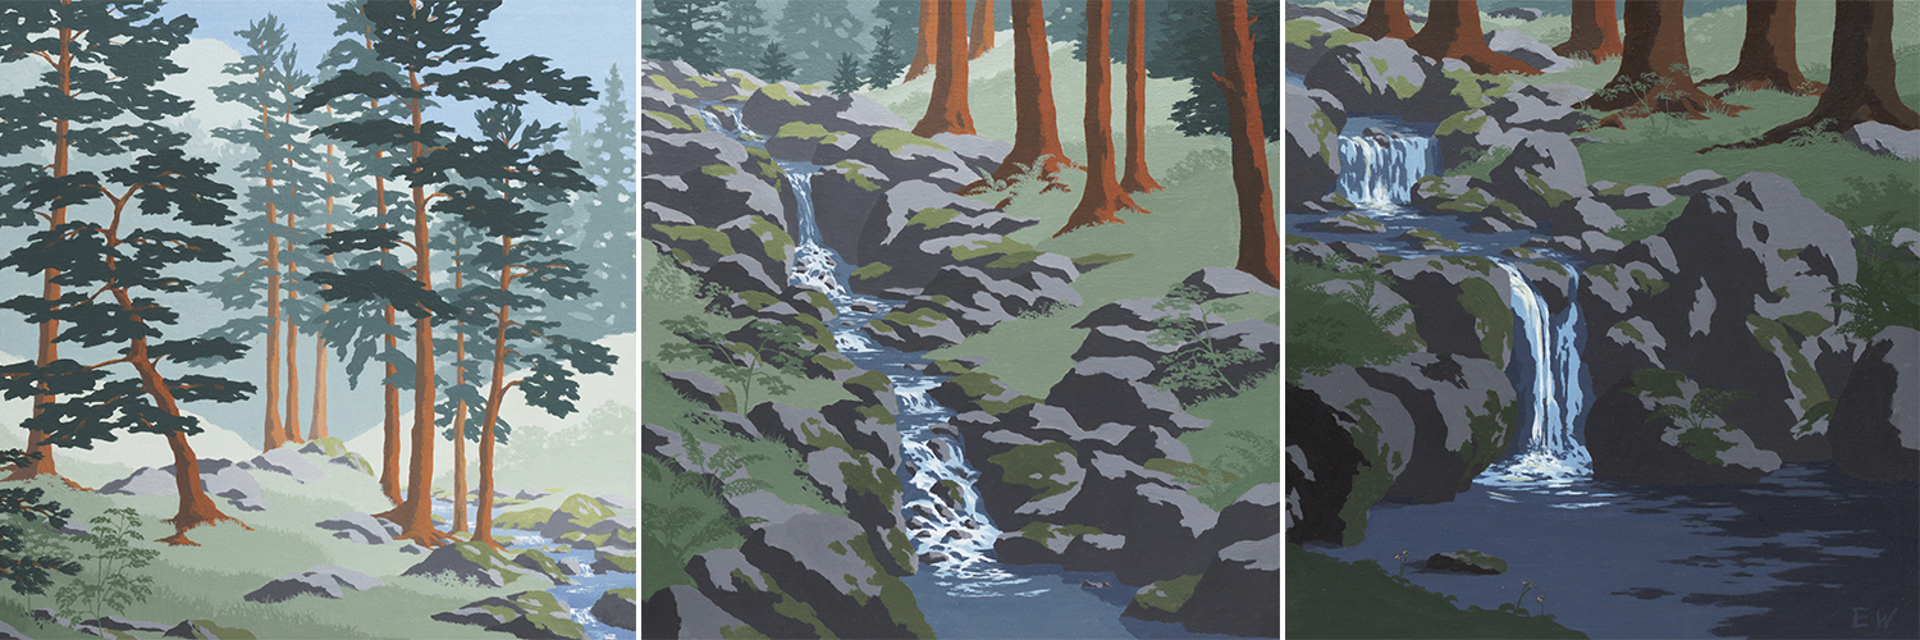 Cascading Brook (Triptych) by Ed Wintner